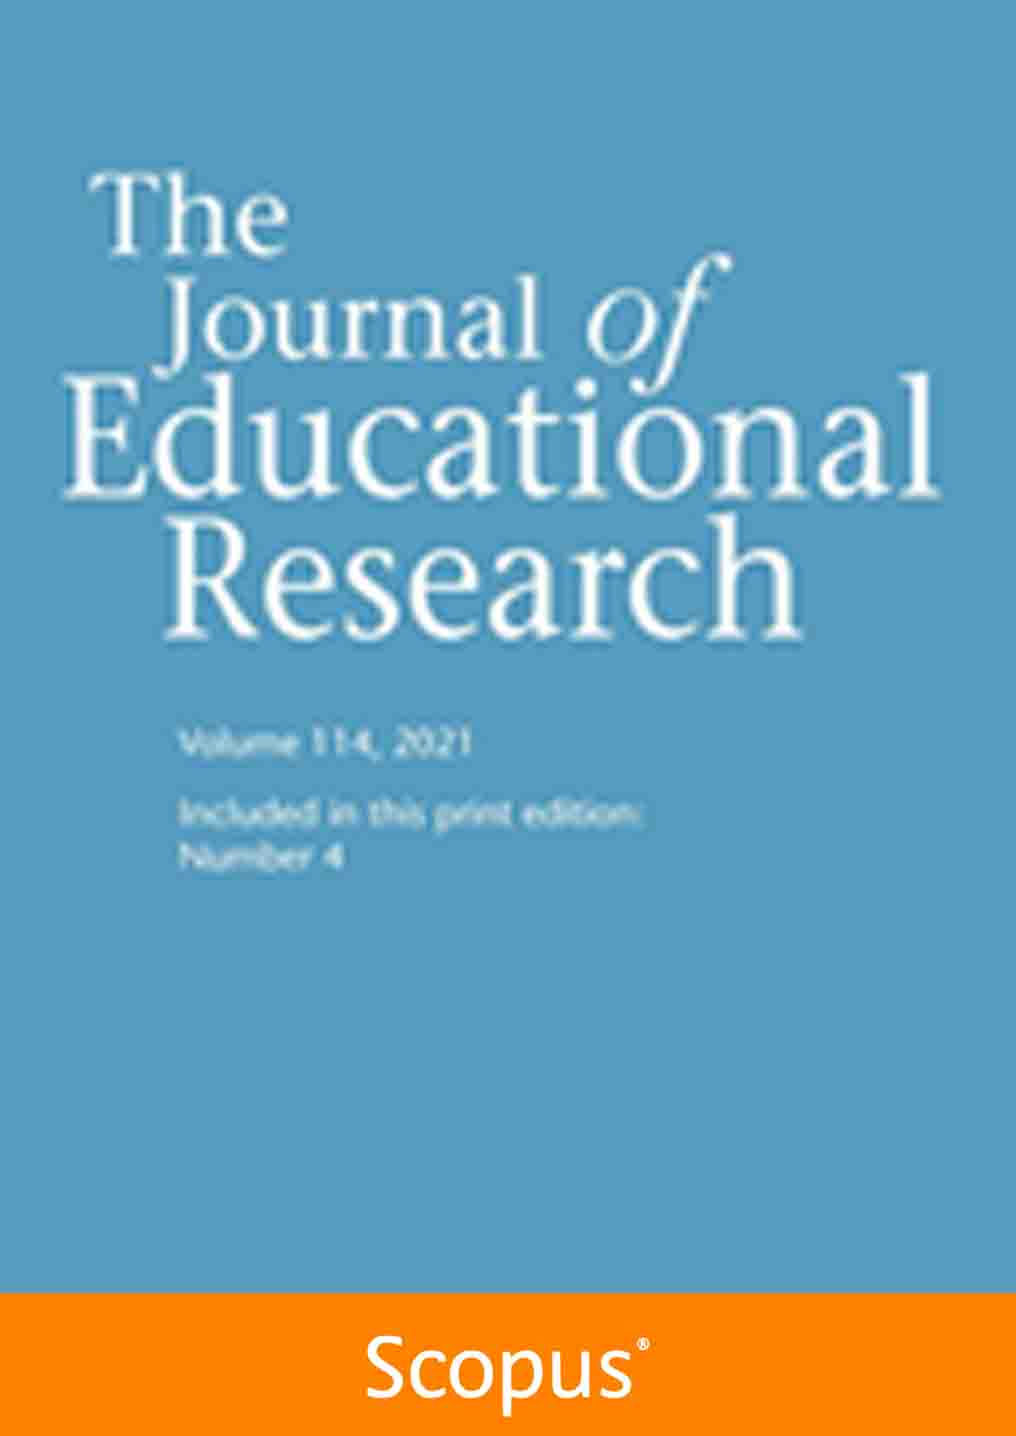 ICEDU - The Journal of Educational Research